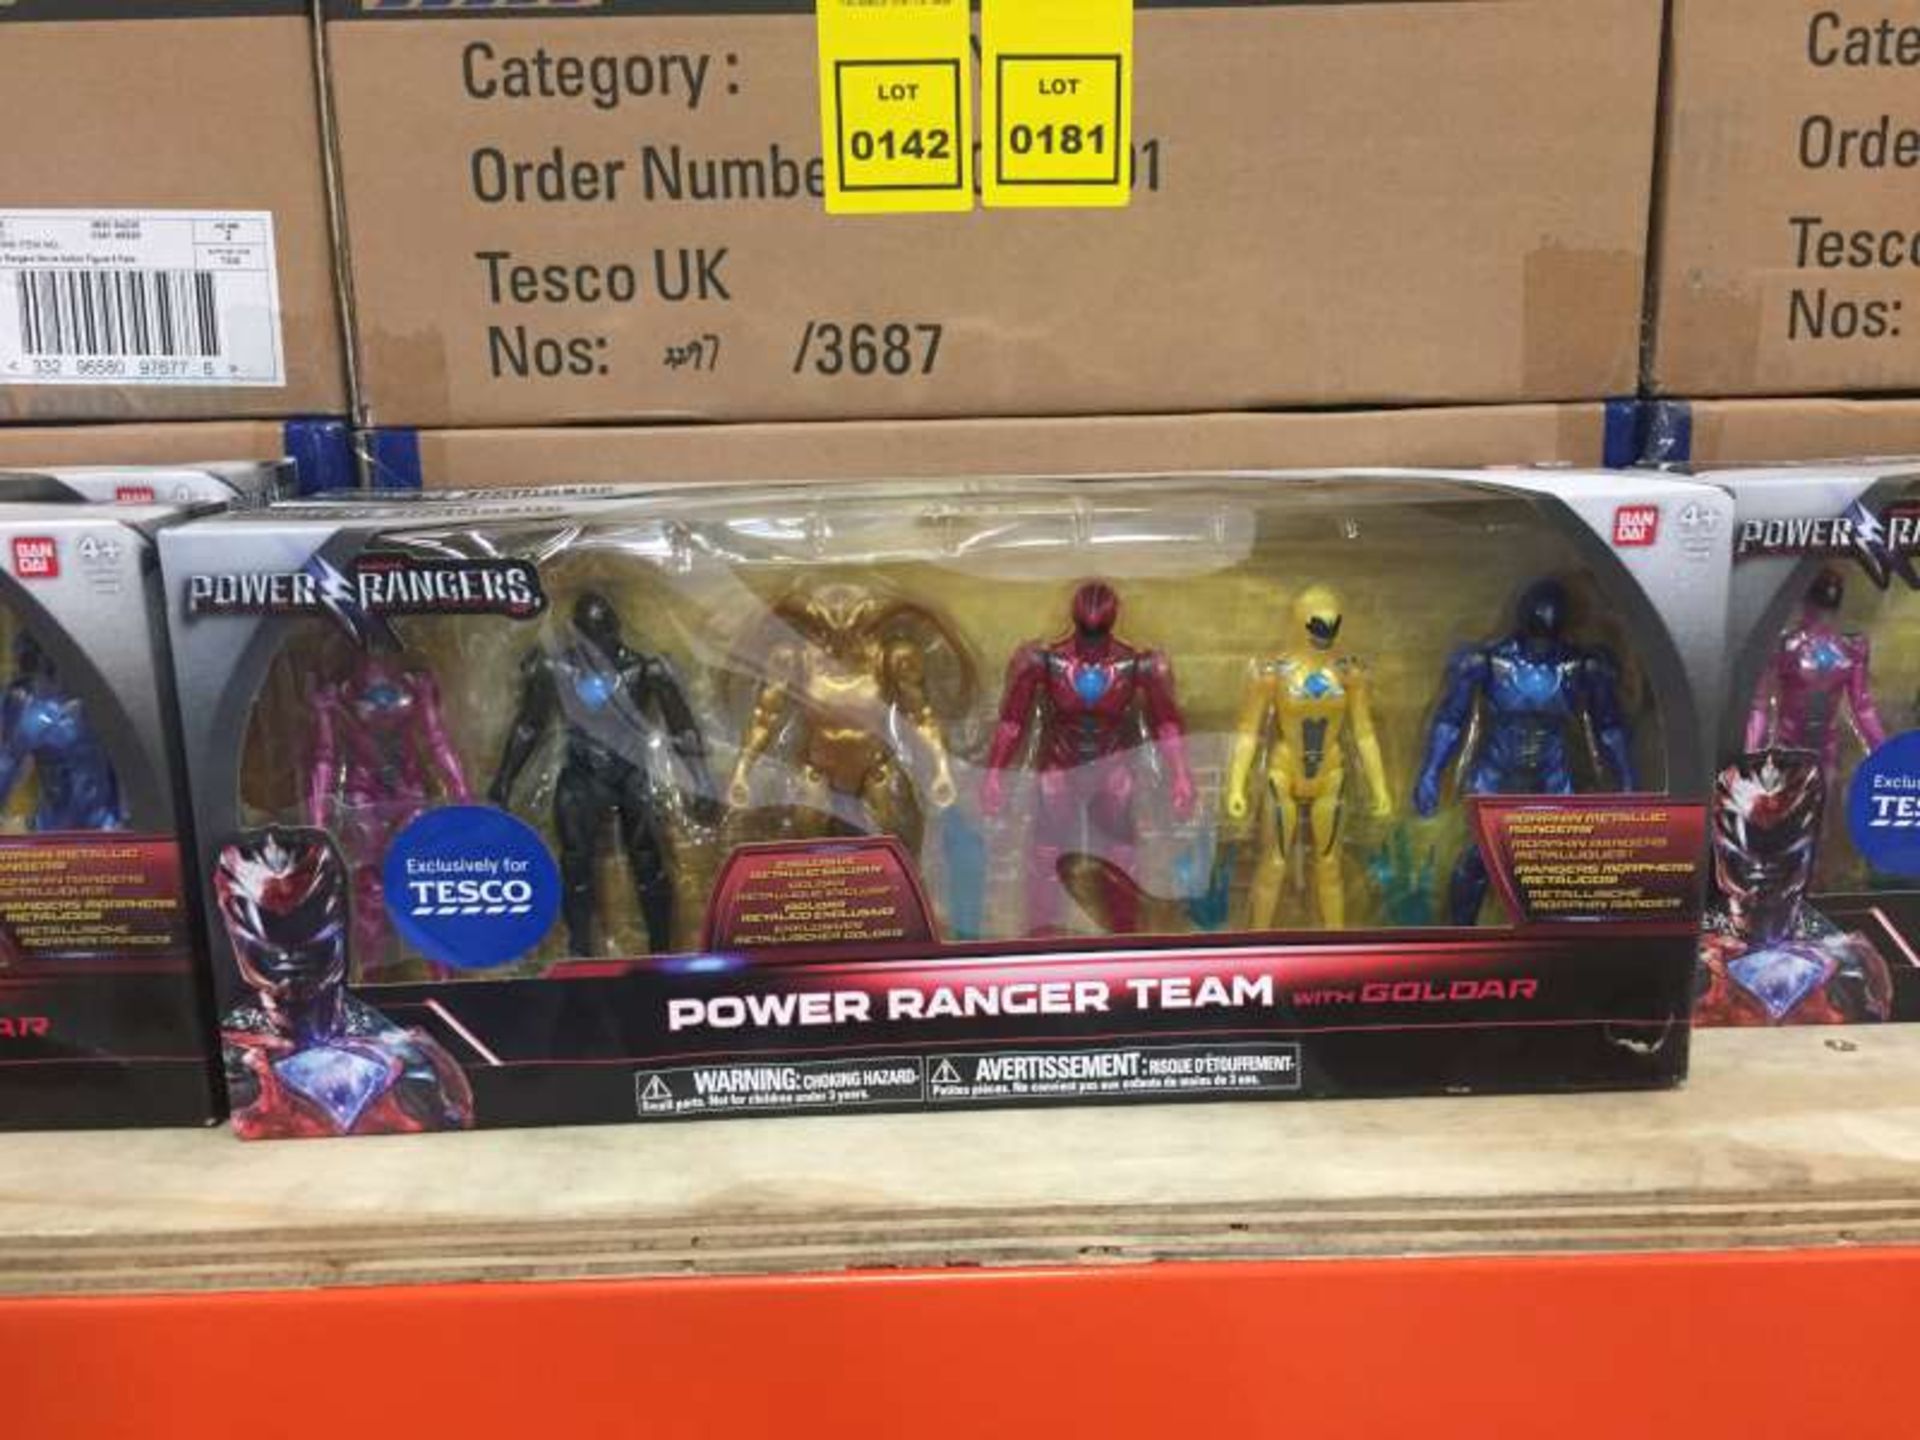 8 X BRAND NEW BOXED 6 PIECE POWER RANGERS FIGURE SETS WITH GOLDAR IN 4 BOXES